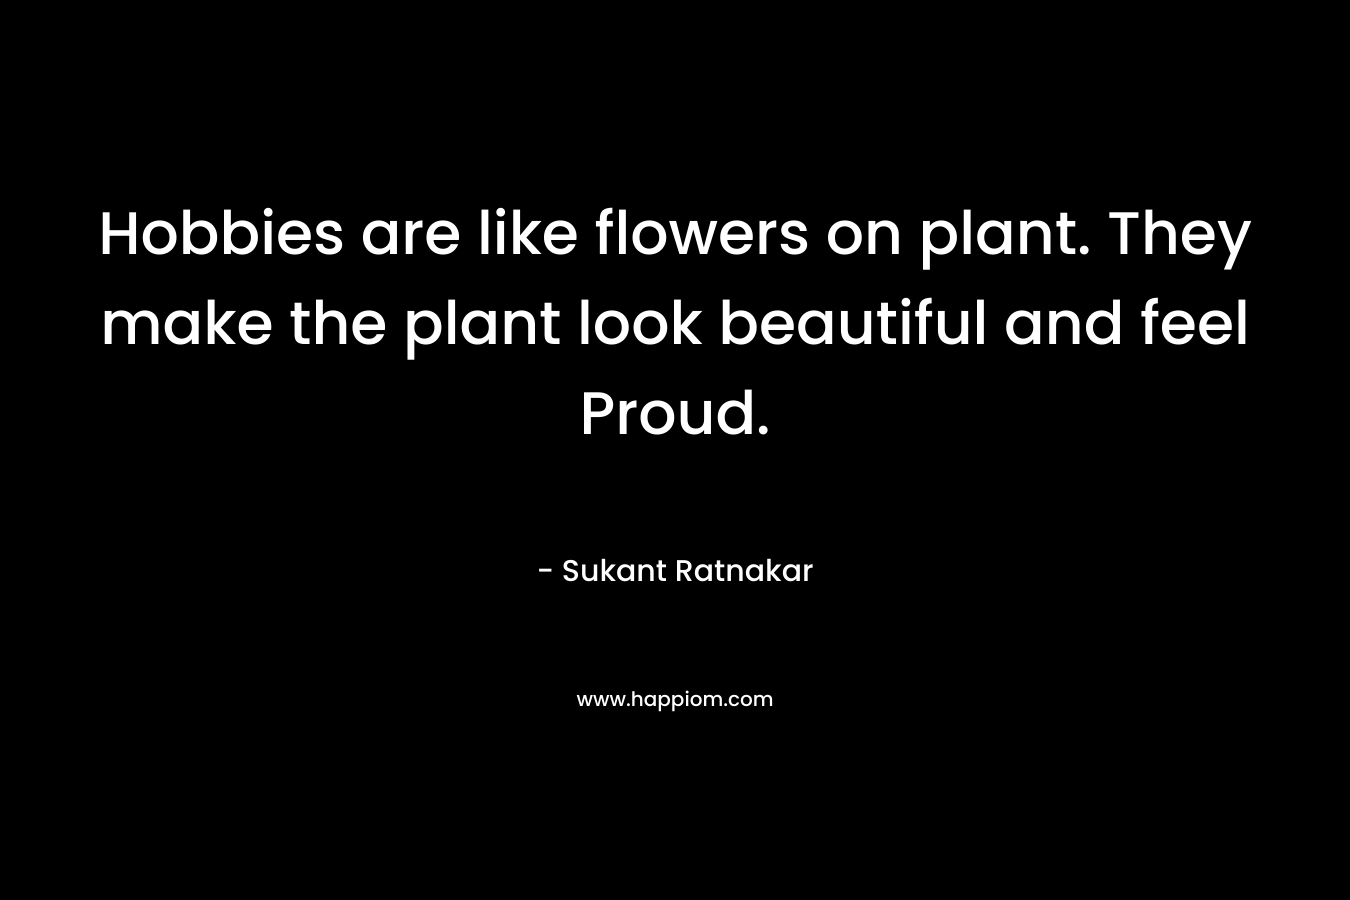 Hobbies are like flowers on plant. They make the plant look beautiful and feel Proud.